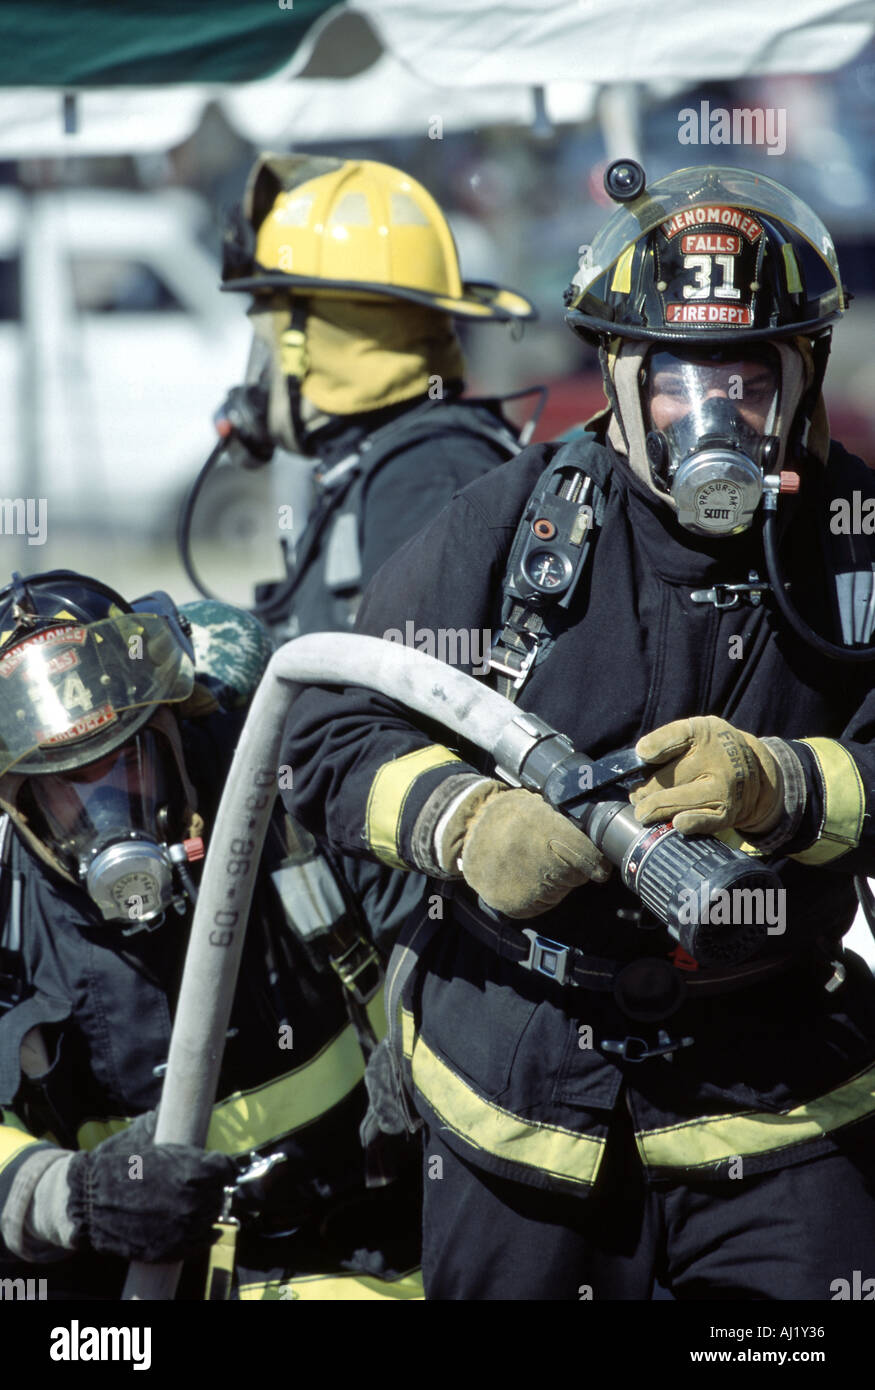 Three fire fighters holding a hoseline getting ready to use it on a fire at a scene Stock Photo